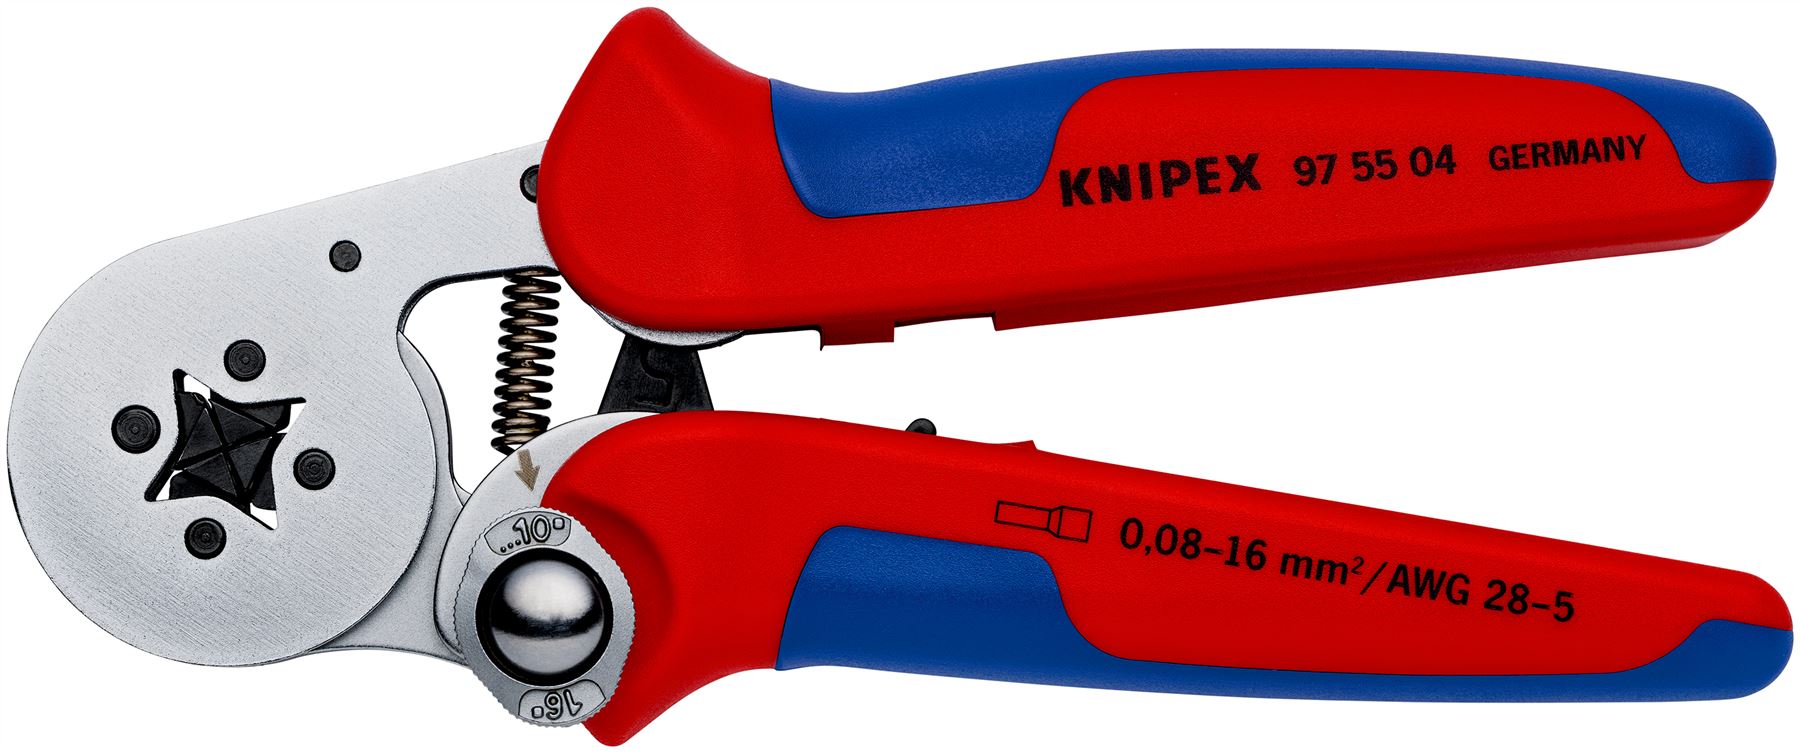 Knipex Self Adjusting Electricians Crimping Pliers for Wire Ferrules 0.08-10/16mm² 28-6 AWG 95 55 04